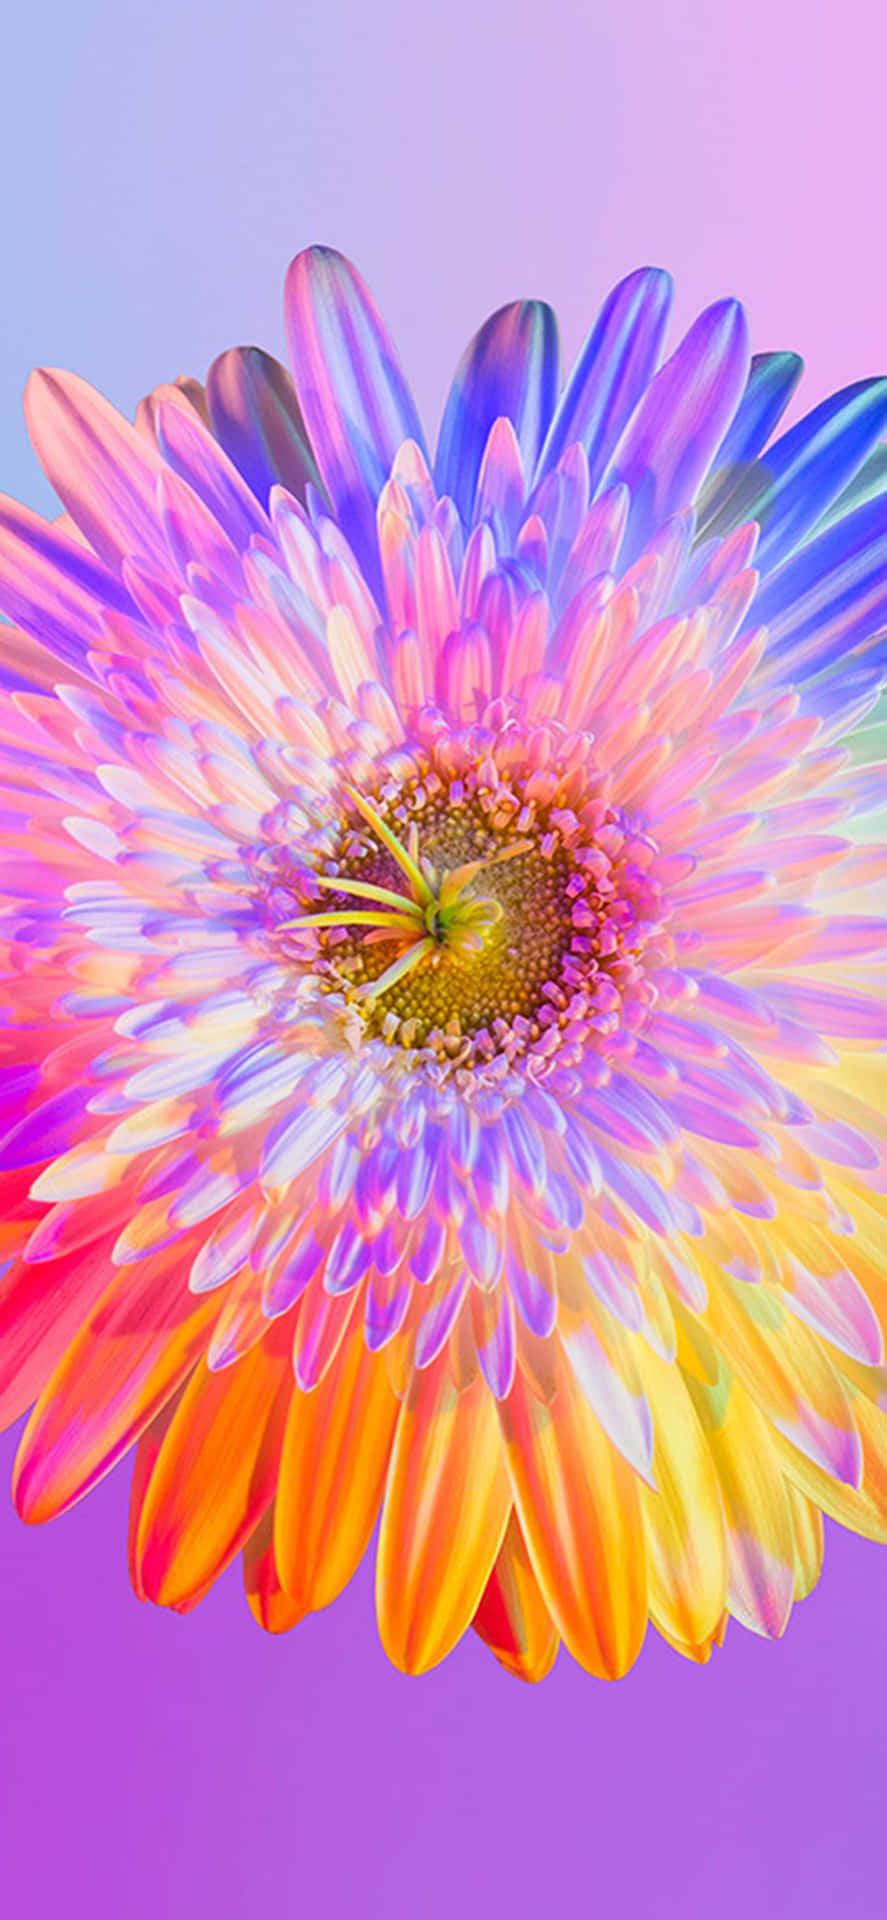 Brighten up your day with this beautiful Rainbow Flower iPhone wallpaper! Wallpaper